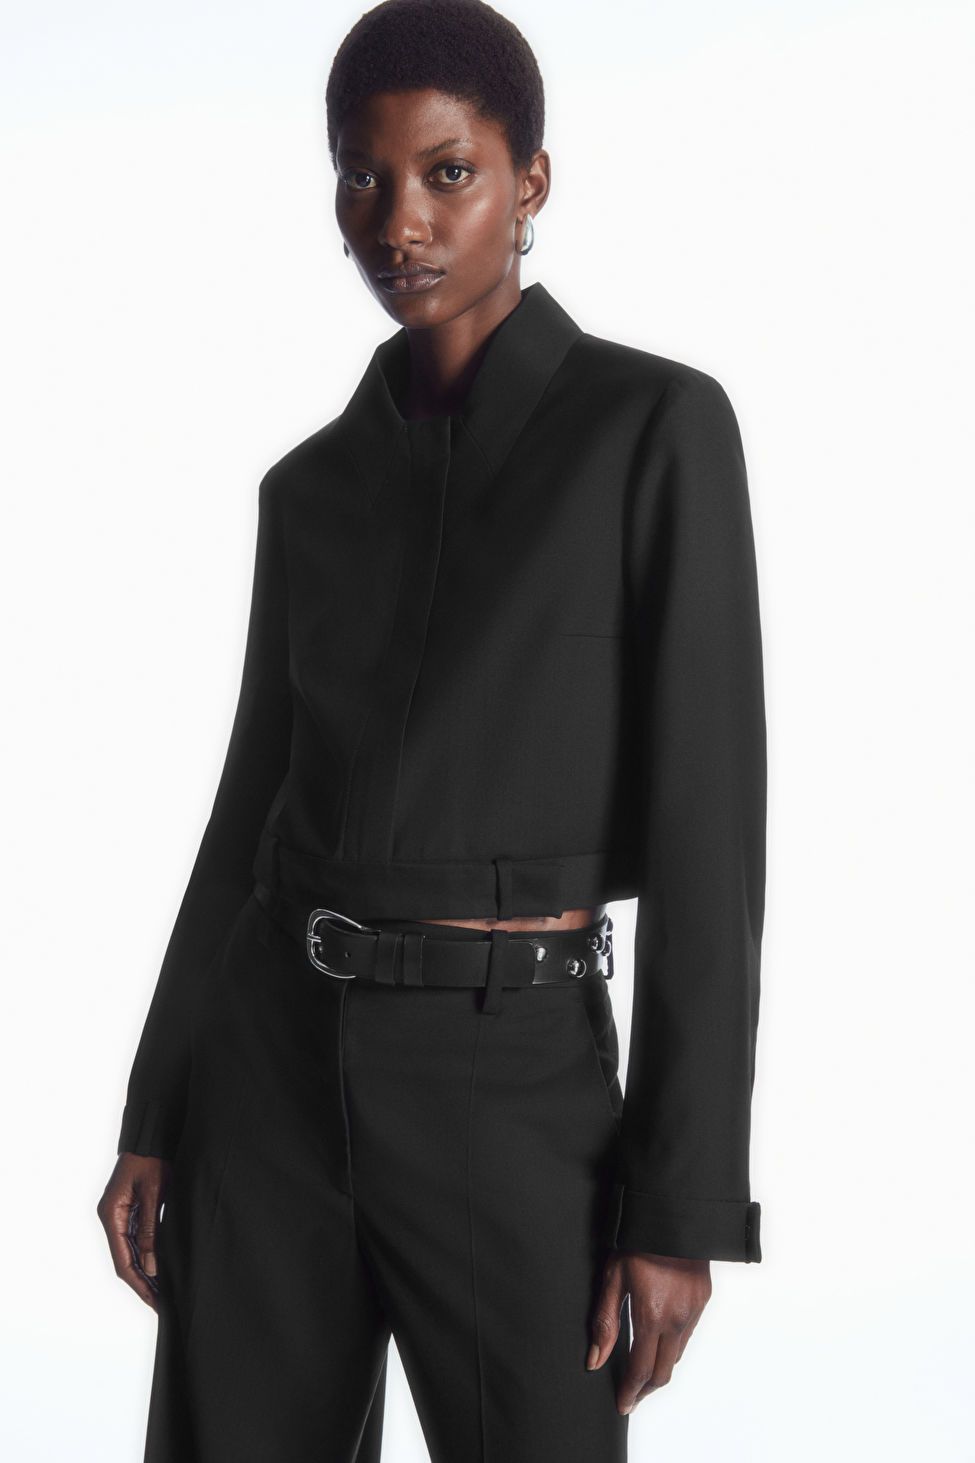 DECONSTRUCTED TAILORED JACKET - BLACK - COS | COS UK